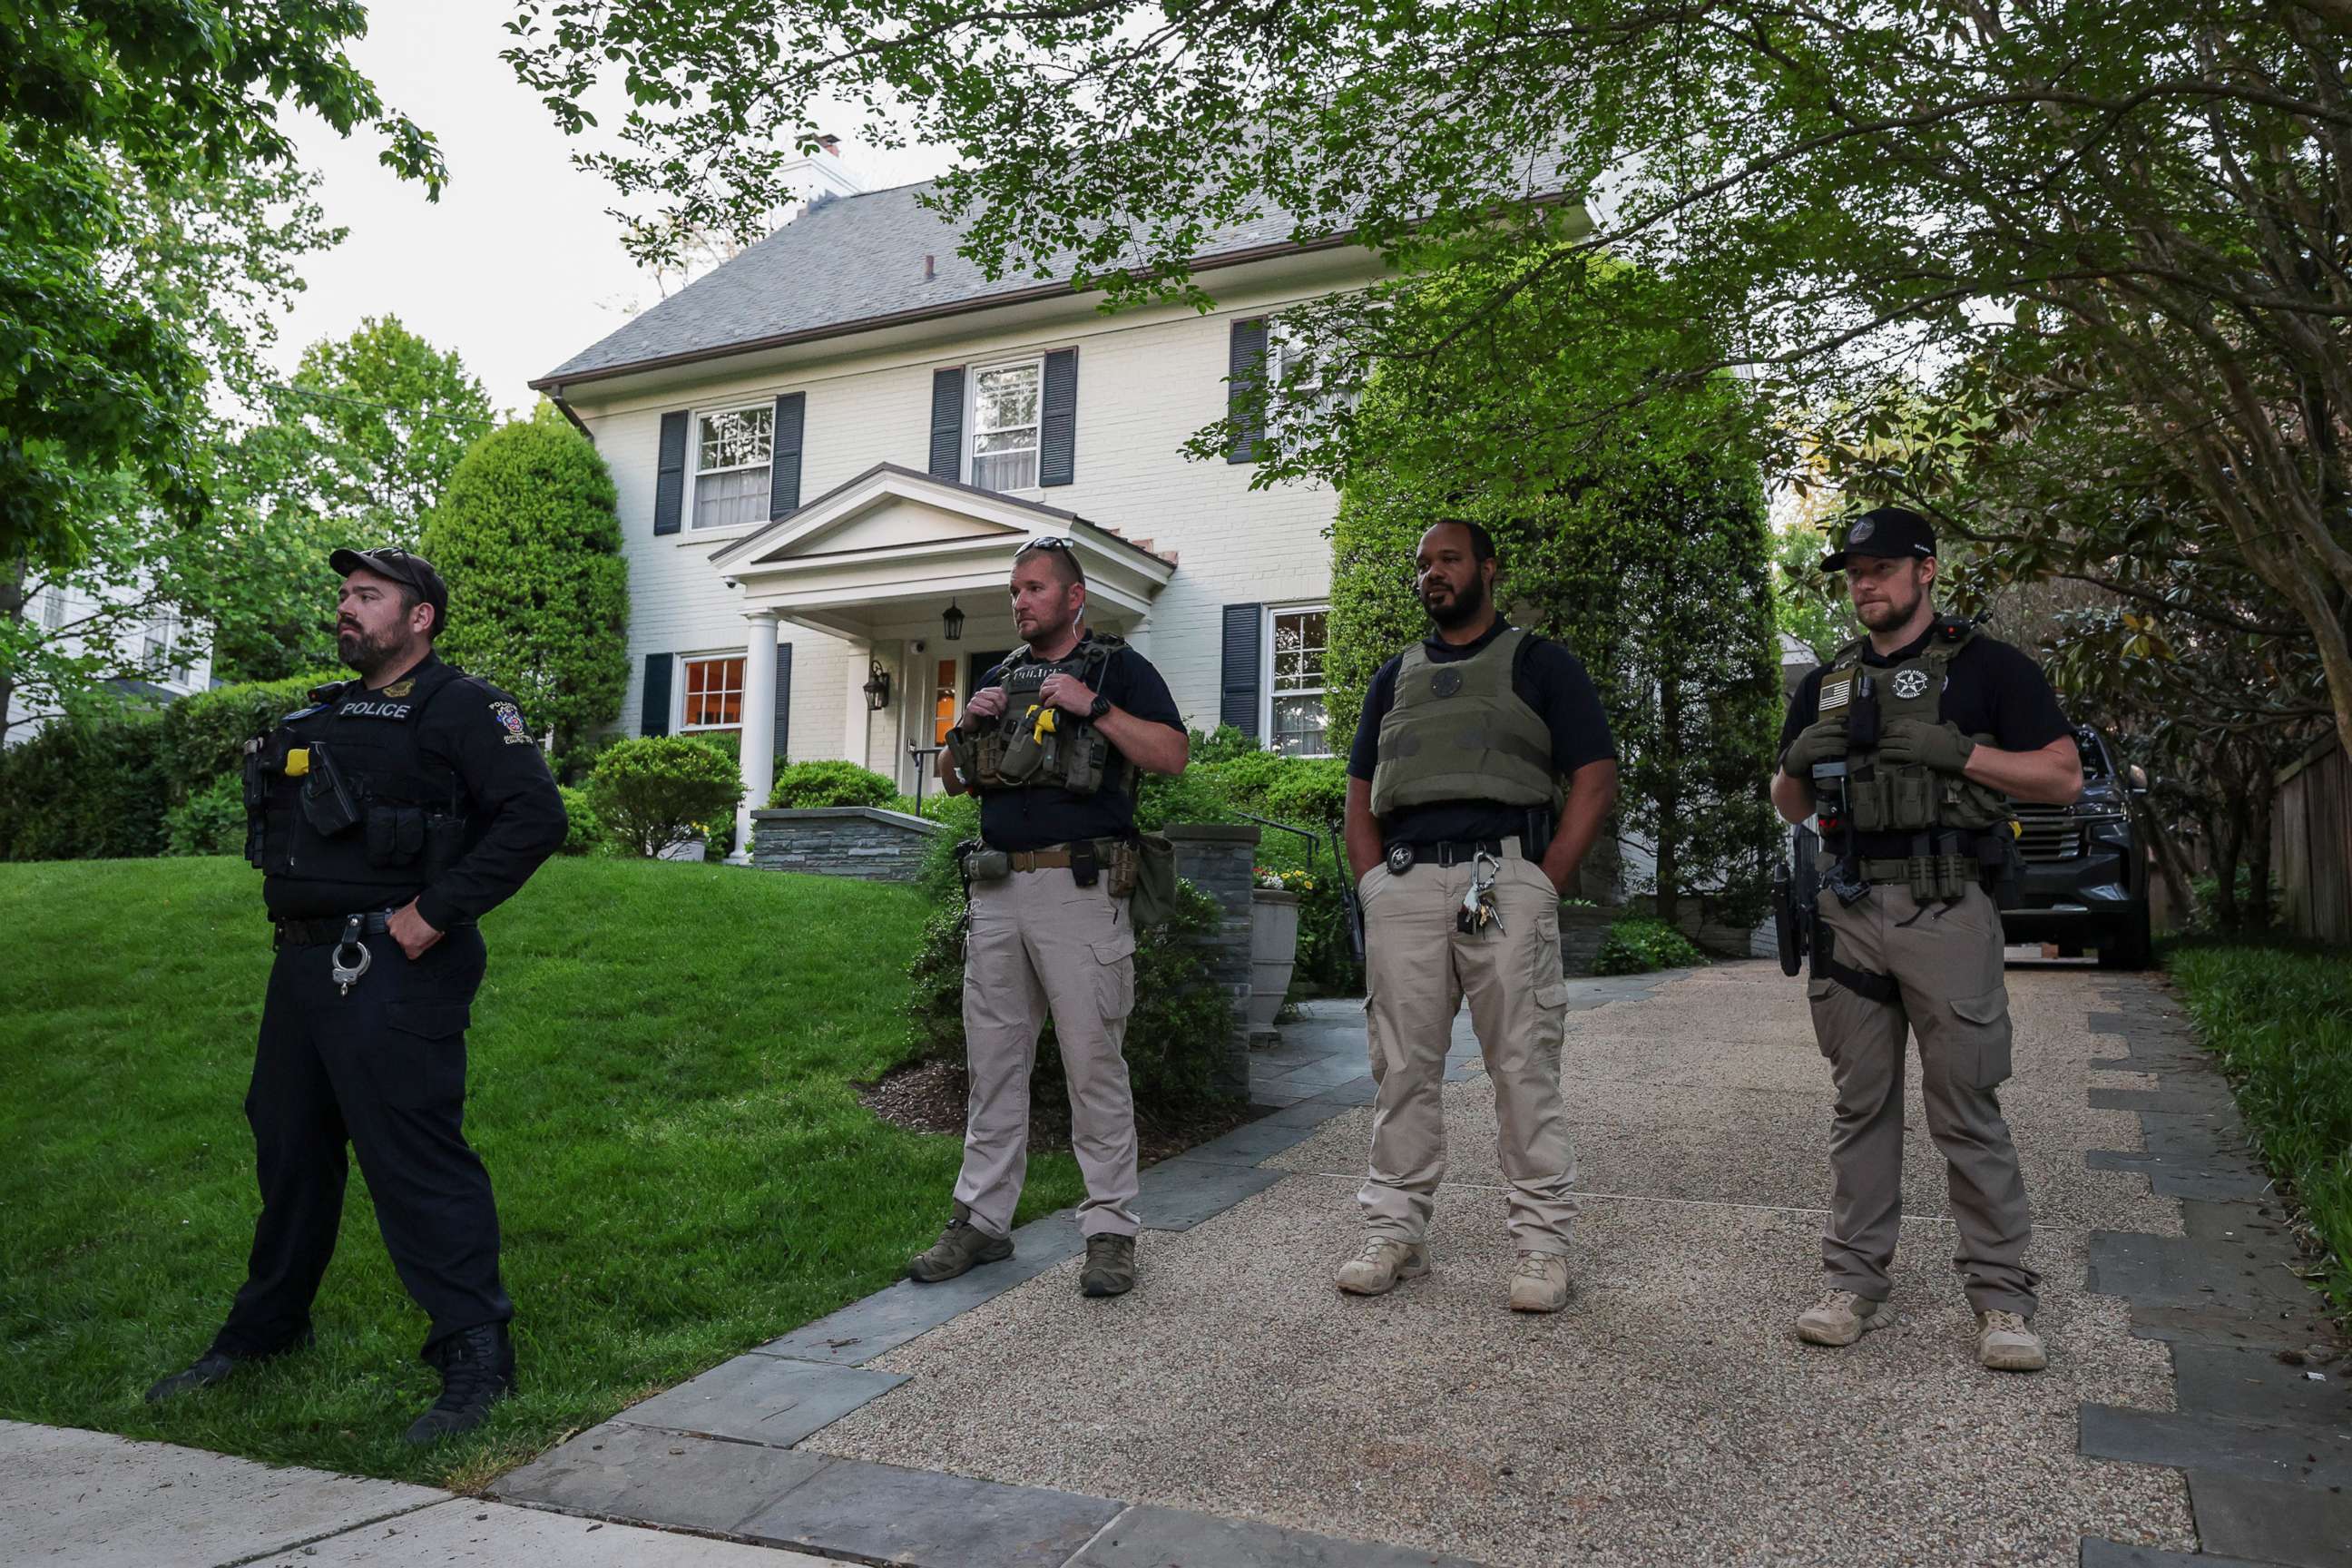 PHOTO: Police stand outside the home of U.S. Supreme Court Chief Justice John Roberts as abortion-rights advocates protest on May 11, 2022 in Chevy Chase, Md.